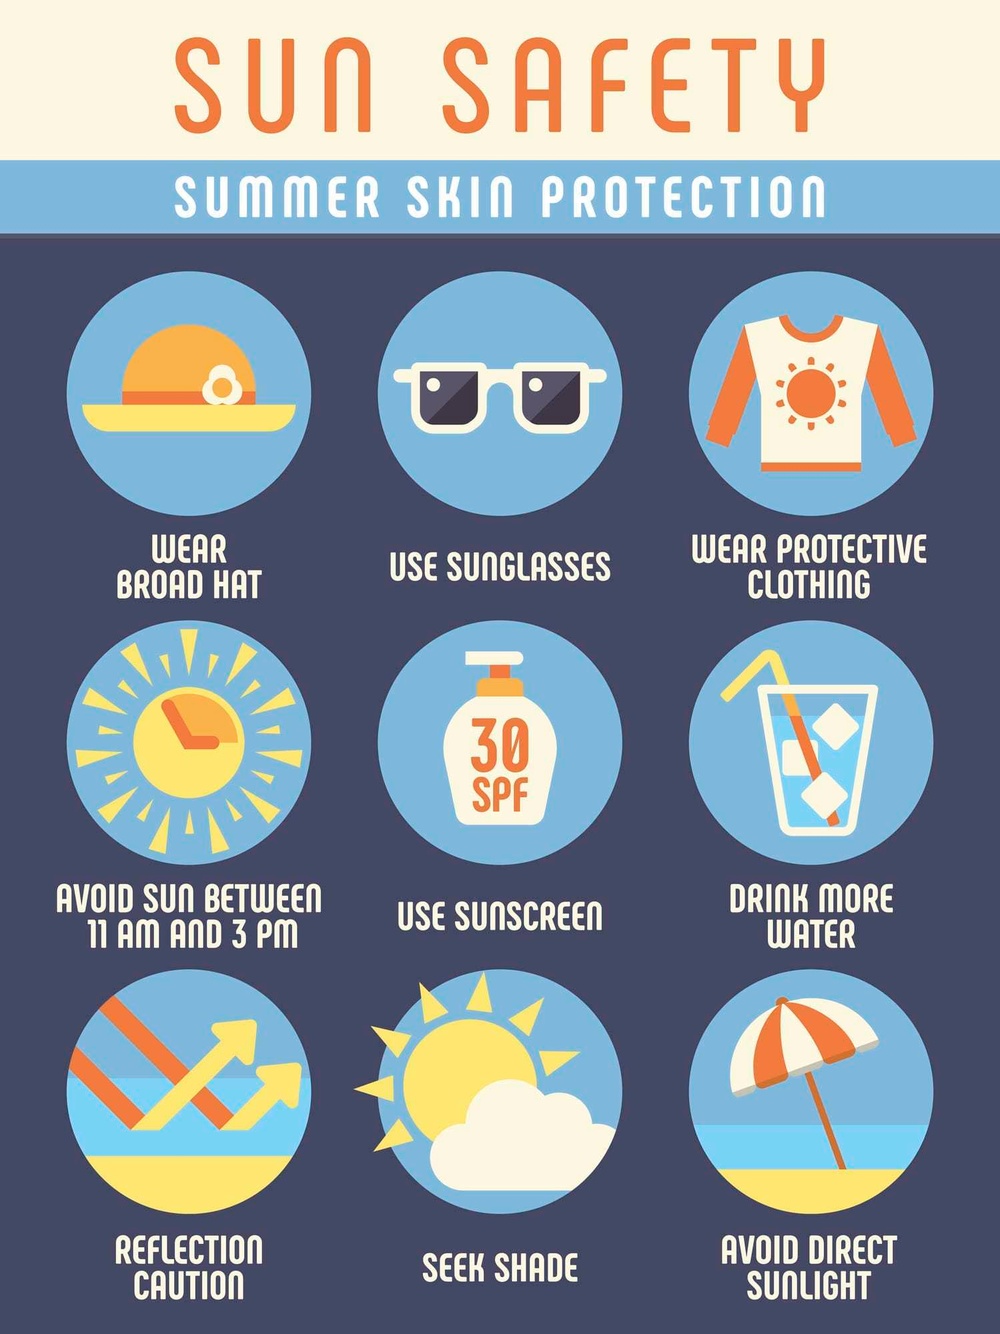 UASACE’s Southwestern Division encourages safety first while enjoying open recreation facilities this summer